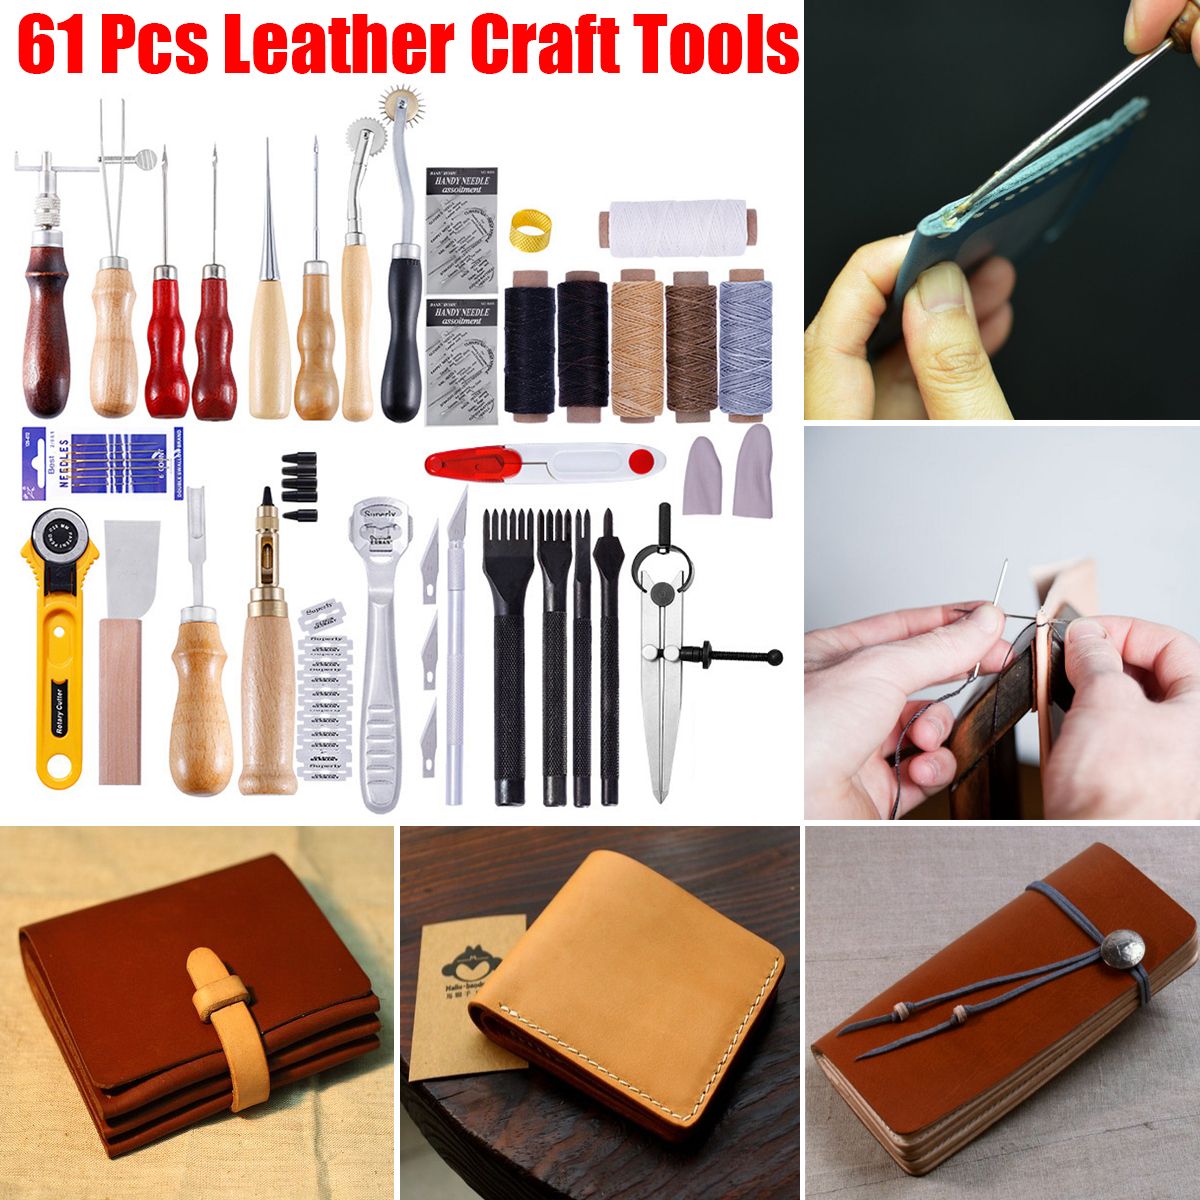 61Pcs-Leather-Craft-Tool-Kit-Hand-Sewing-Stitching-Punch-Carving-Saddle-Edger-1570180